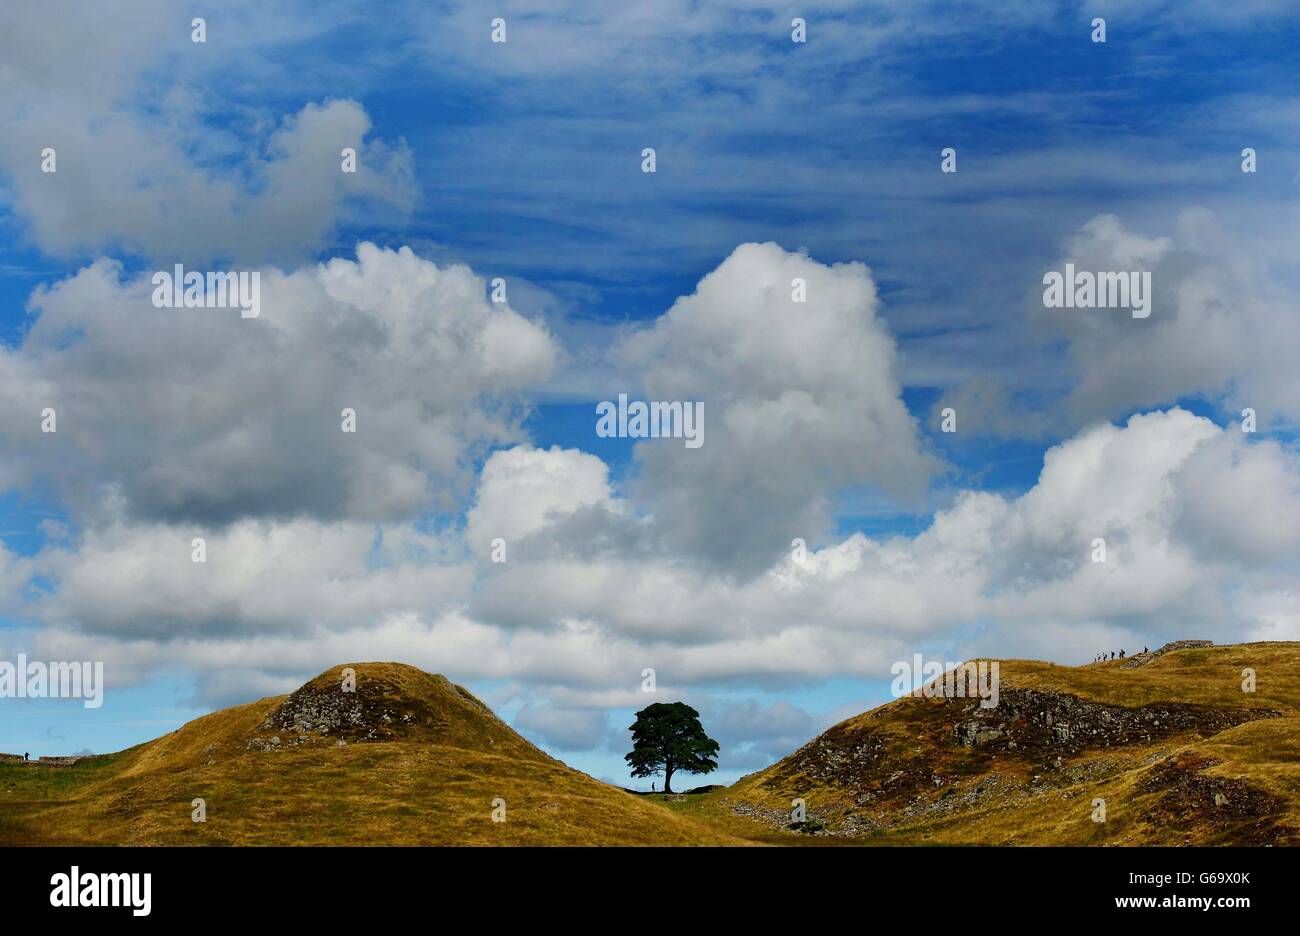 Sycamore Gap on Hadrian's Wall in Northumberland, which featured in the film 'Robin Hood Prince of Thieves', as it was announced that July was the warmest, driest and sunniest since 2006. Stock Photo